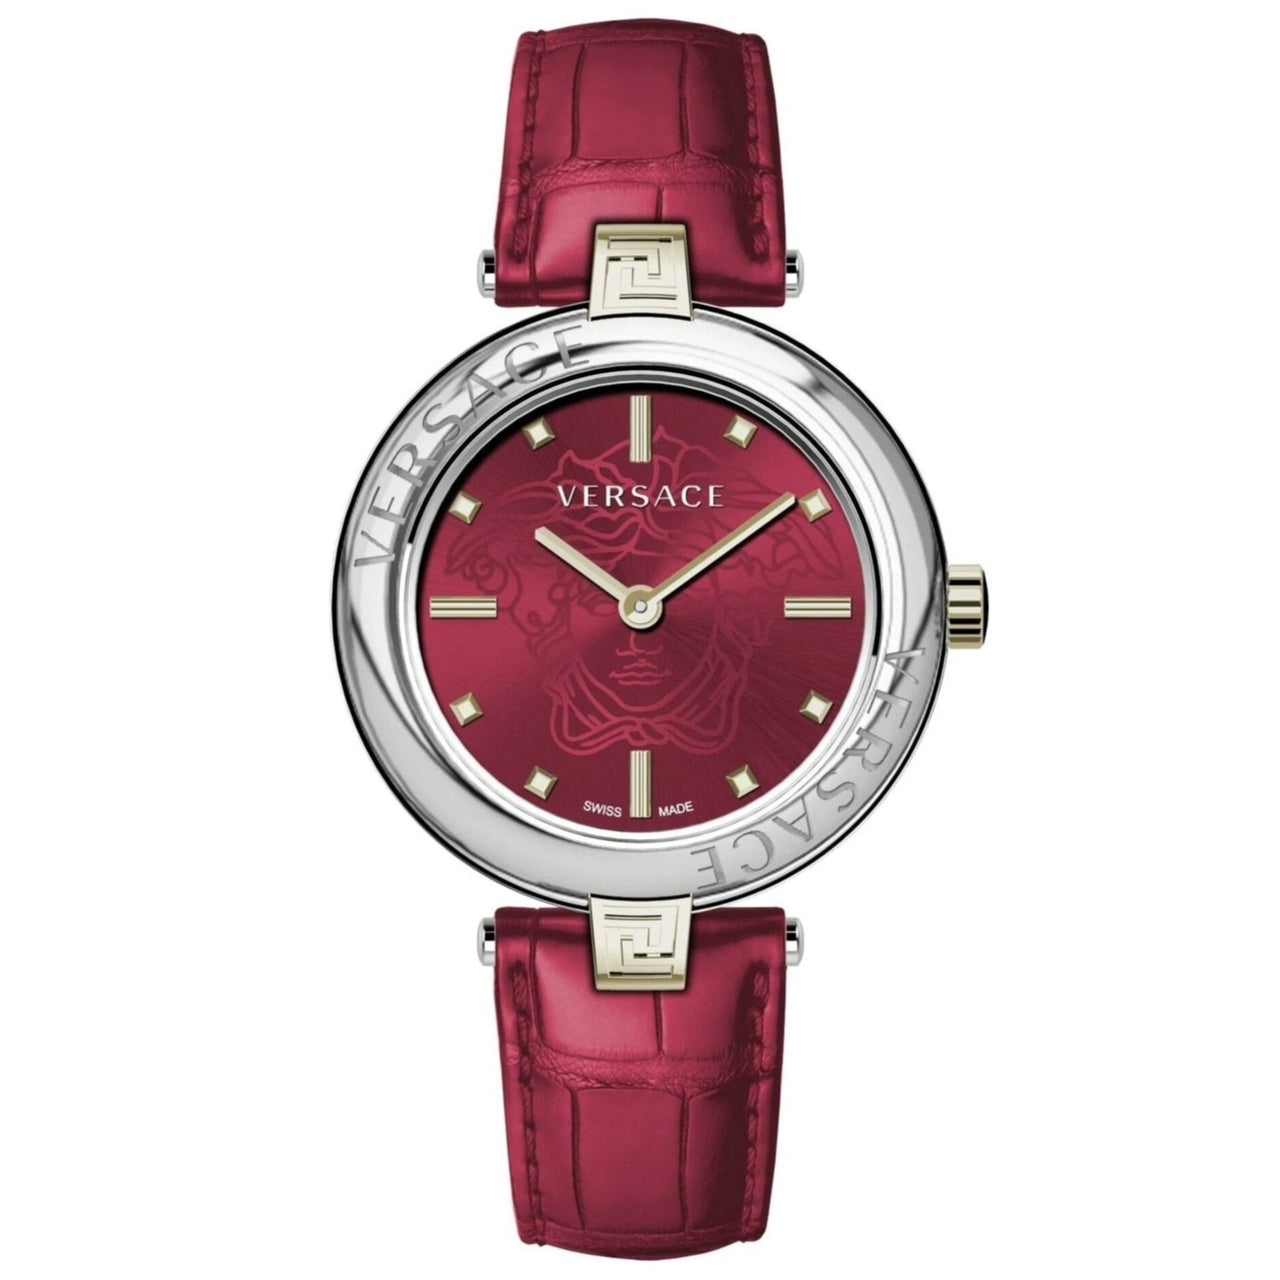 Versace Watch New Lady 38mm Red VE2J00321 - Watches & Crystals